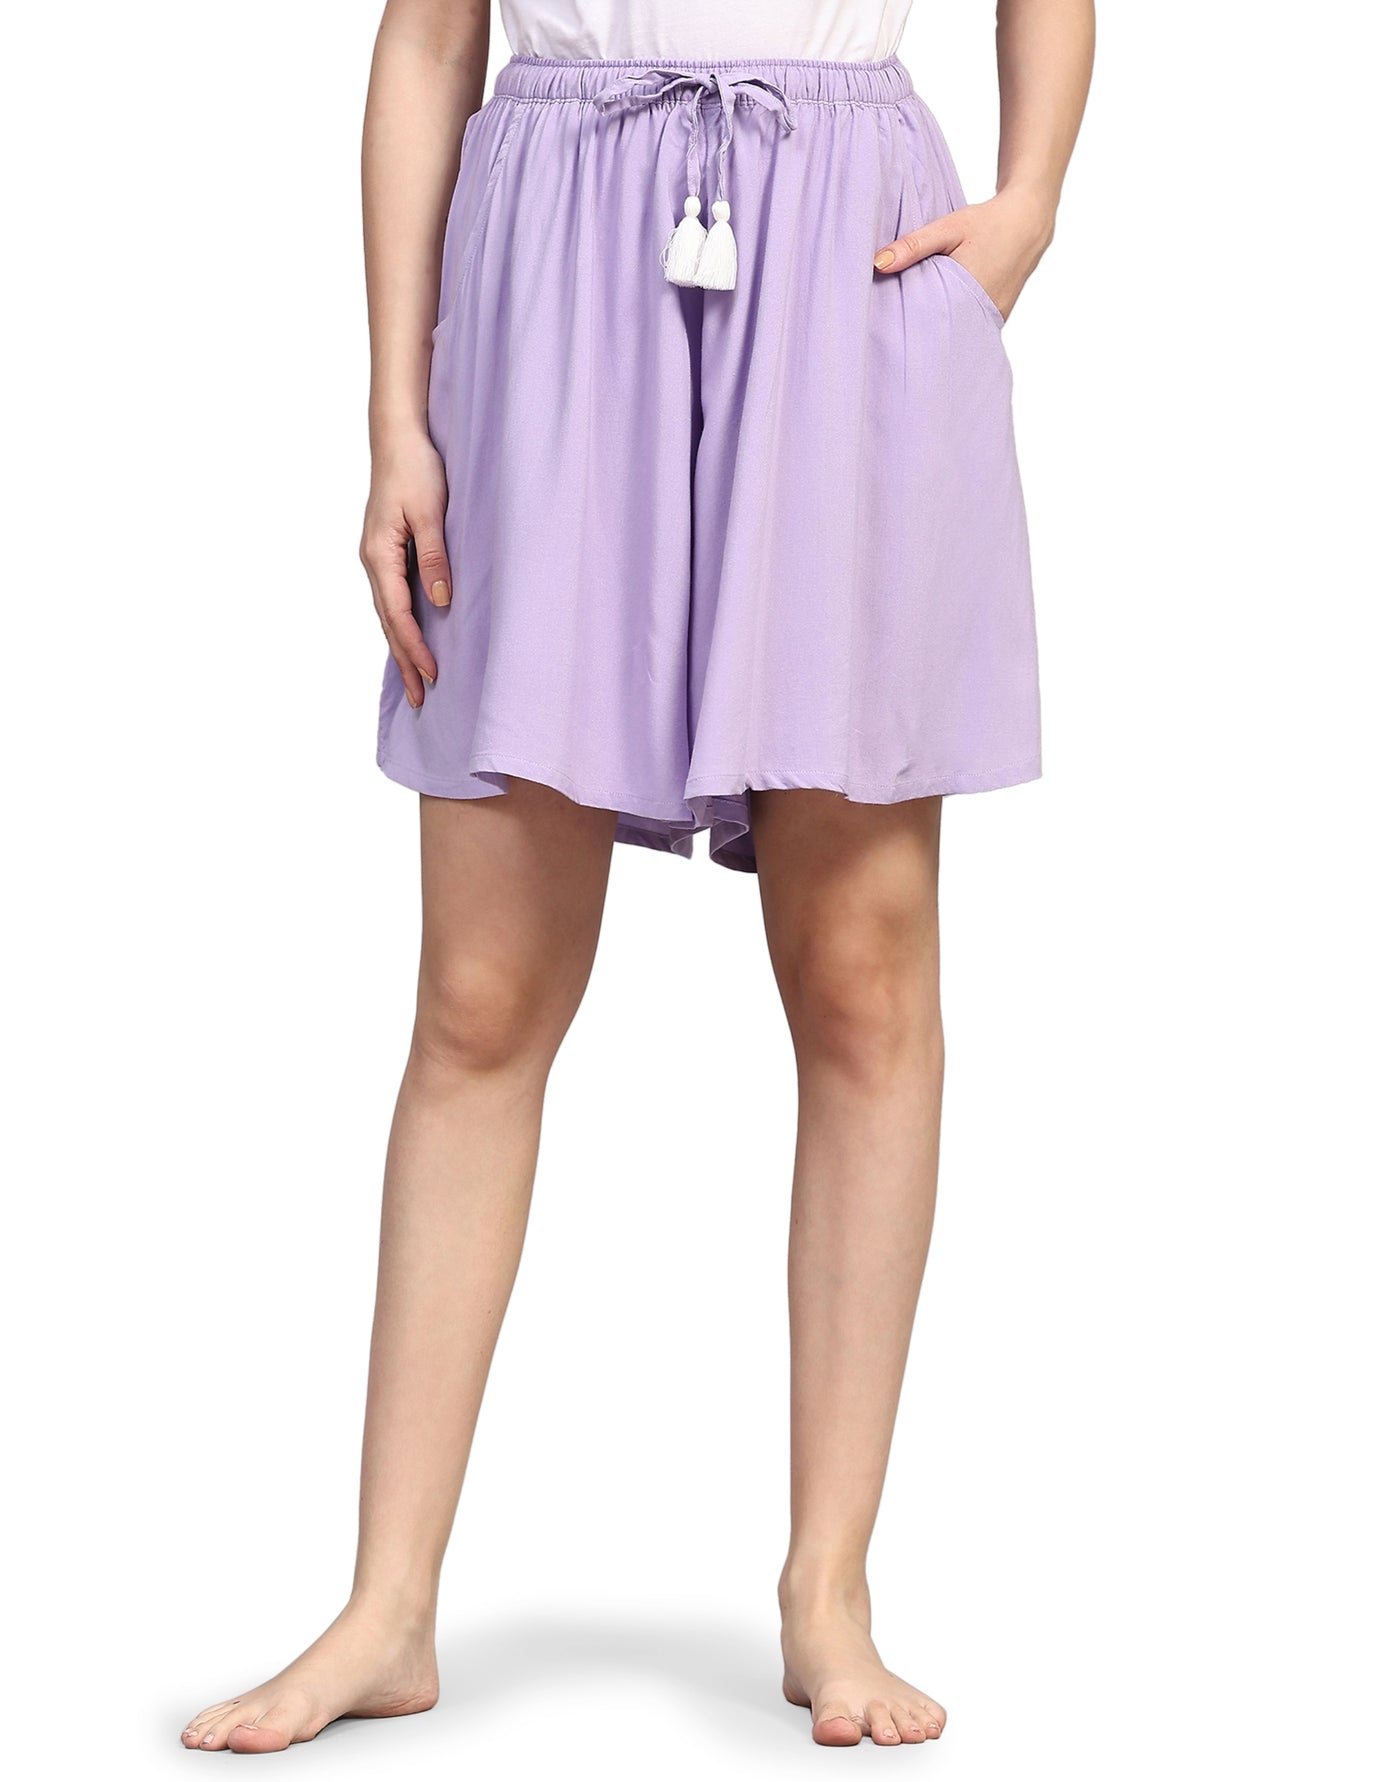 Culotte Shorts for Women-Lavender Solid